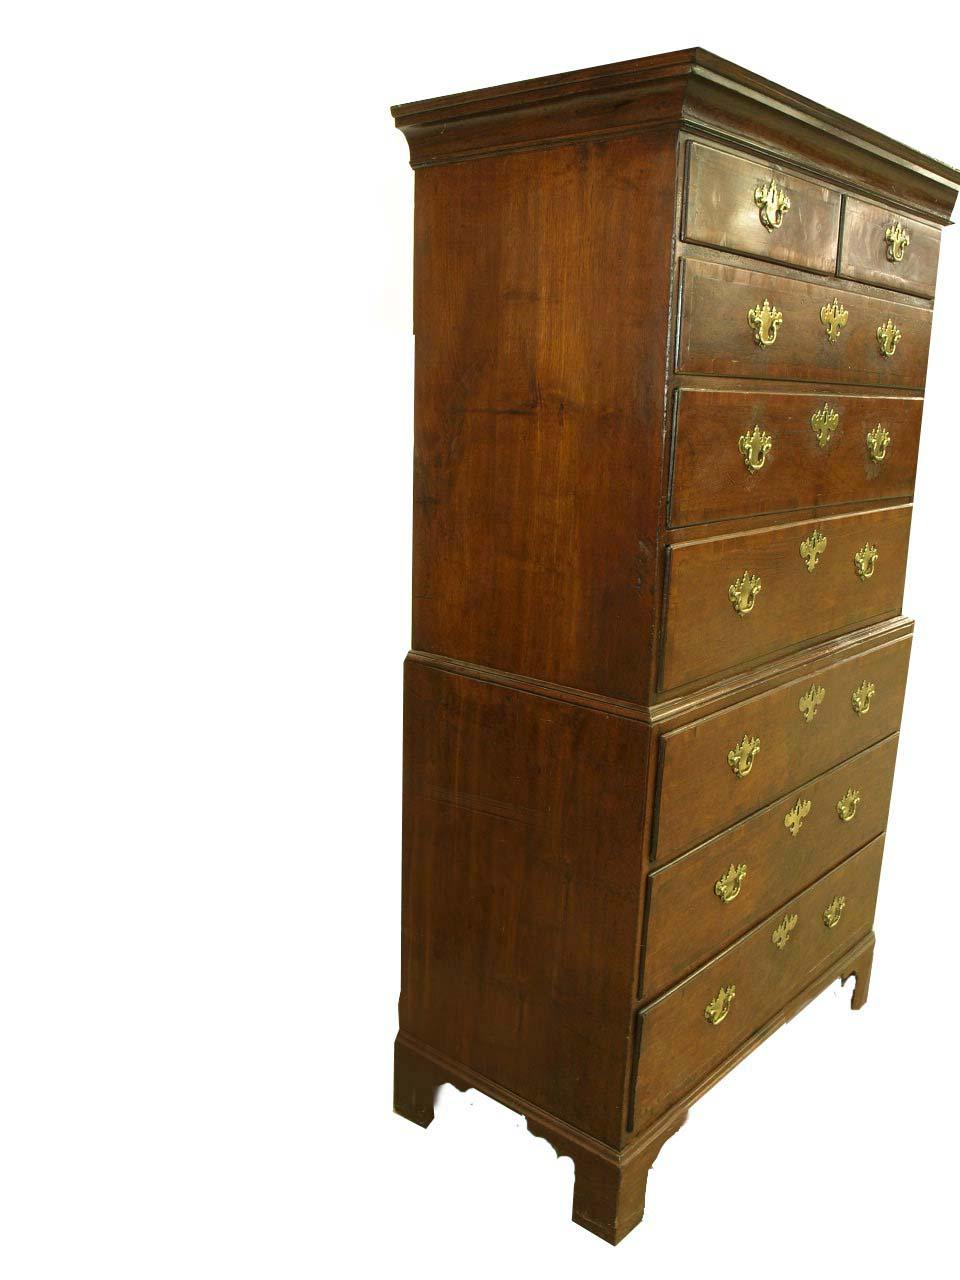 George II walnut chest on chest, the upper section with cove cornice above two over three graduated drawers, the drawers are cross banded in walnut and have oak secondary wood. The lower section with three graduated drawers, resting on bracket feet.